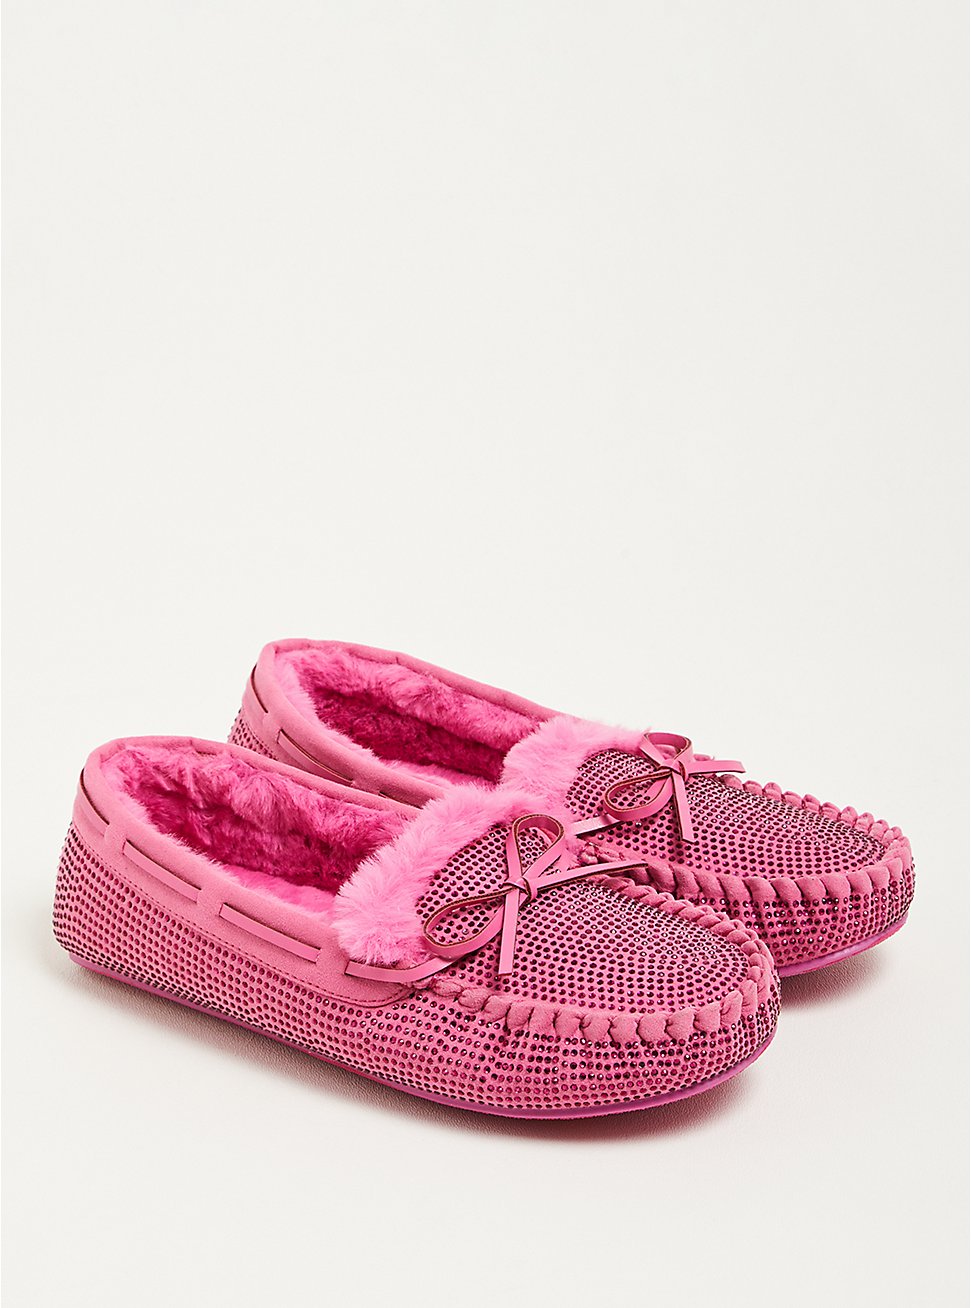 Studded Slipper - Faux Suede Pink (WW), PINK, hi-res